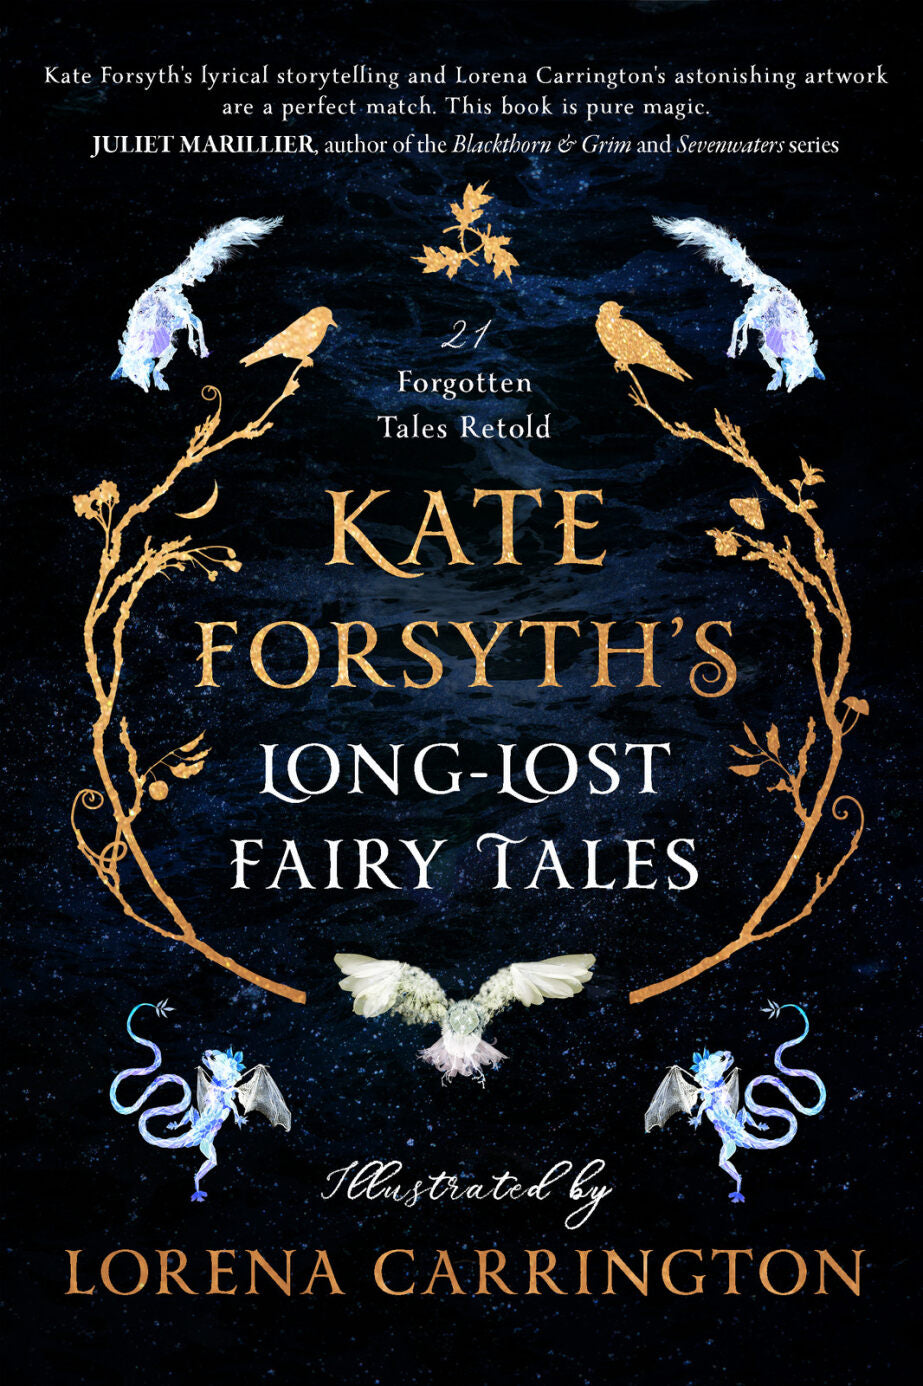 Kate Forsyth's Long-Lost Fairy Tales